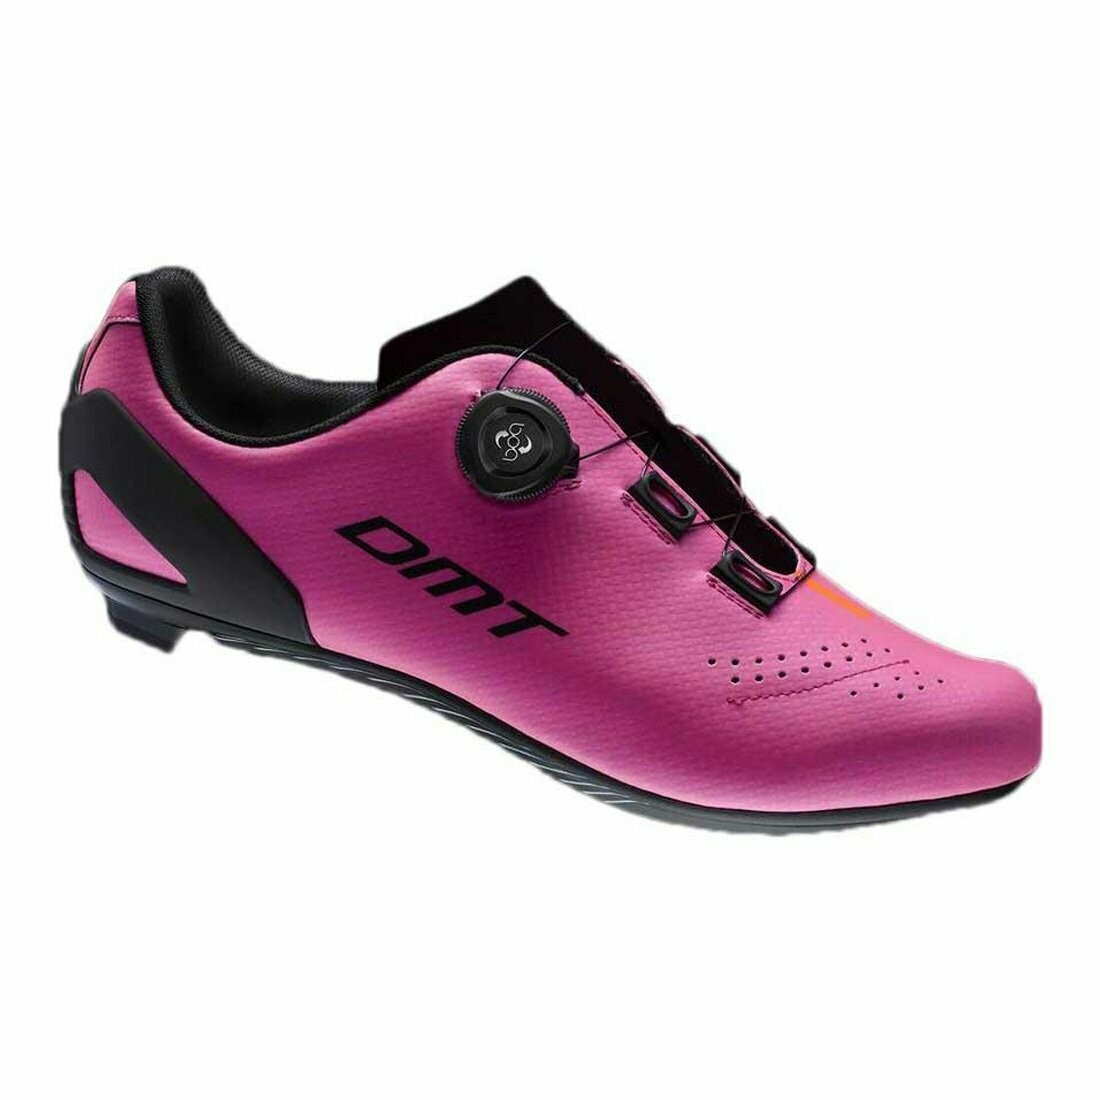 DMT D5 Cycling Shoes - Pink